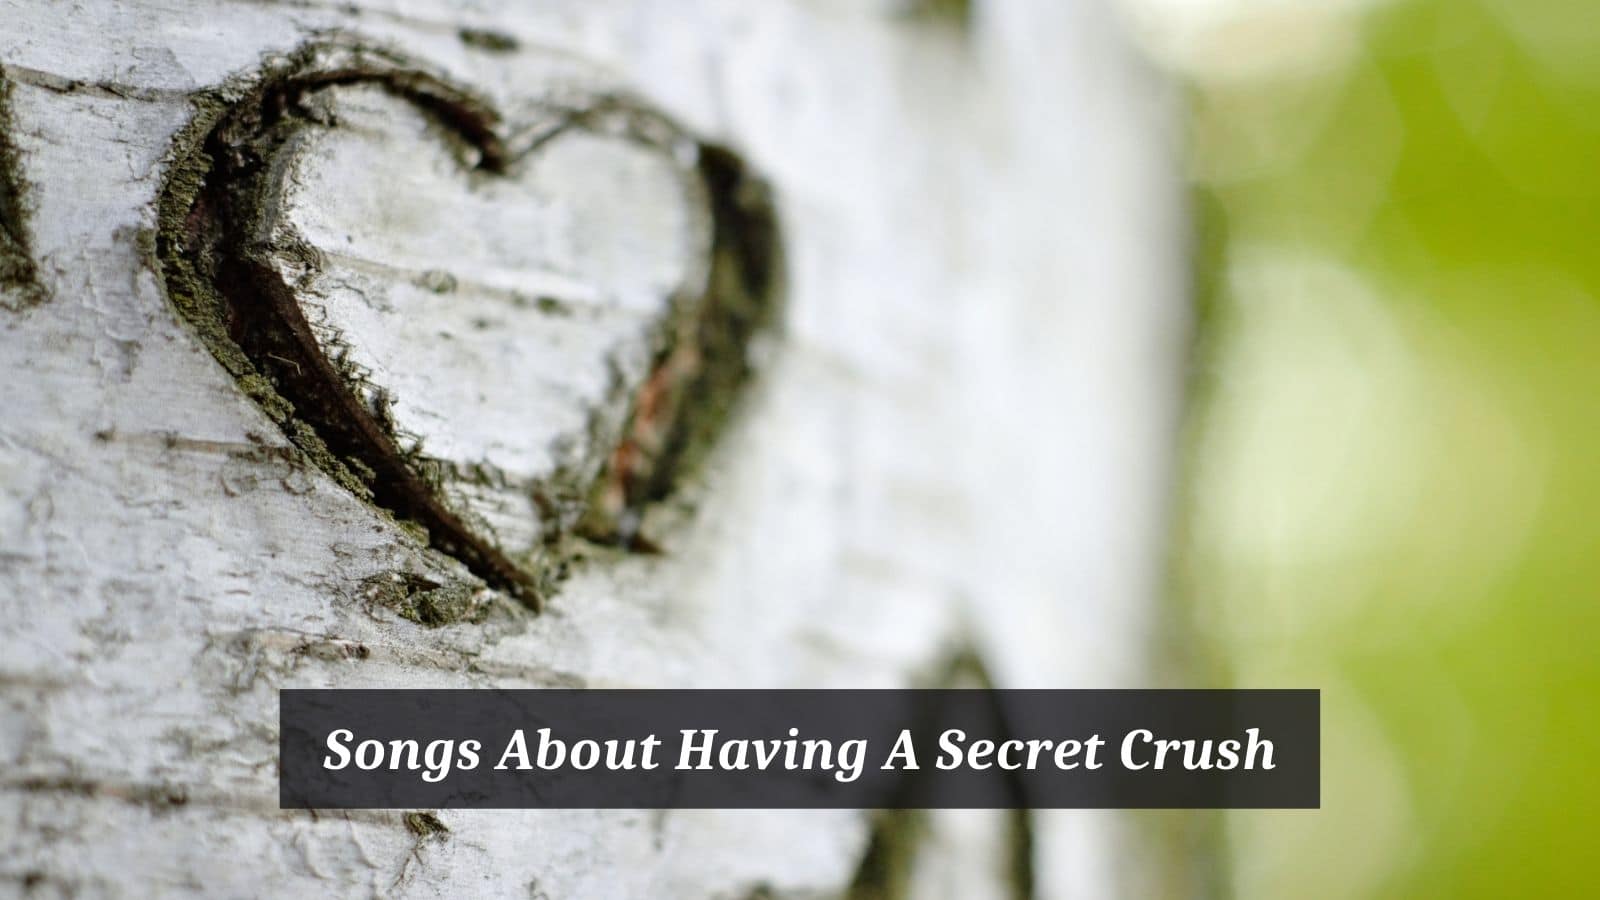 Songs About Having A Secret Crush